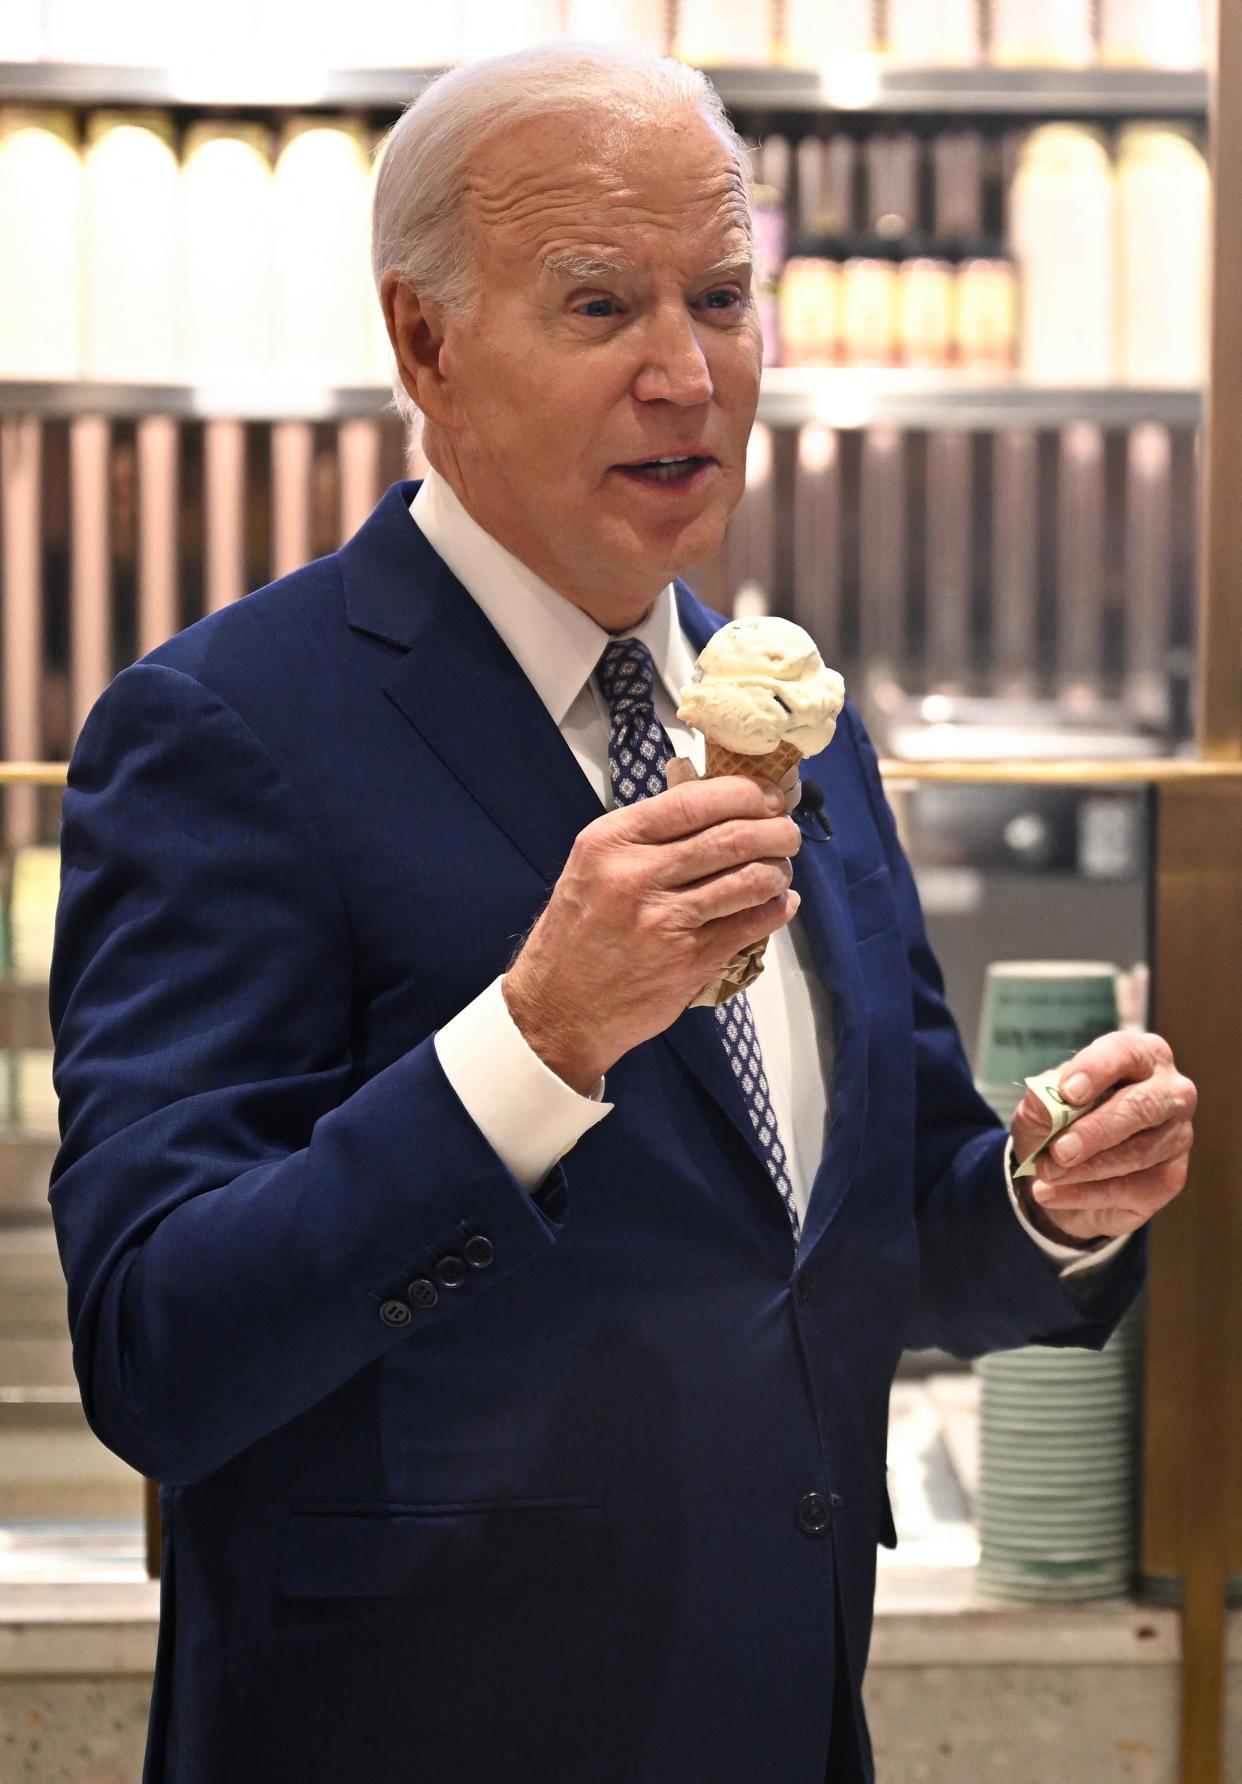 President Joe Biden enjoys an ice cream cone at a Van Leeuwen ice cream shop in New York City after taping an episode of "Late Night with Seth Meyers."